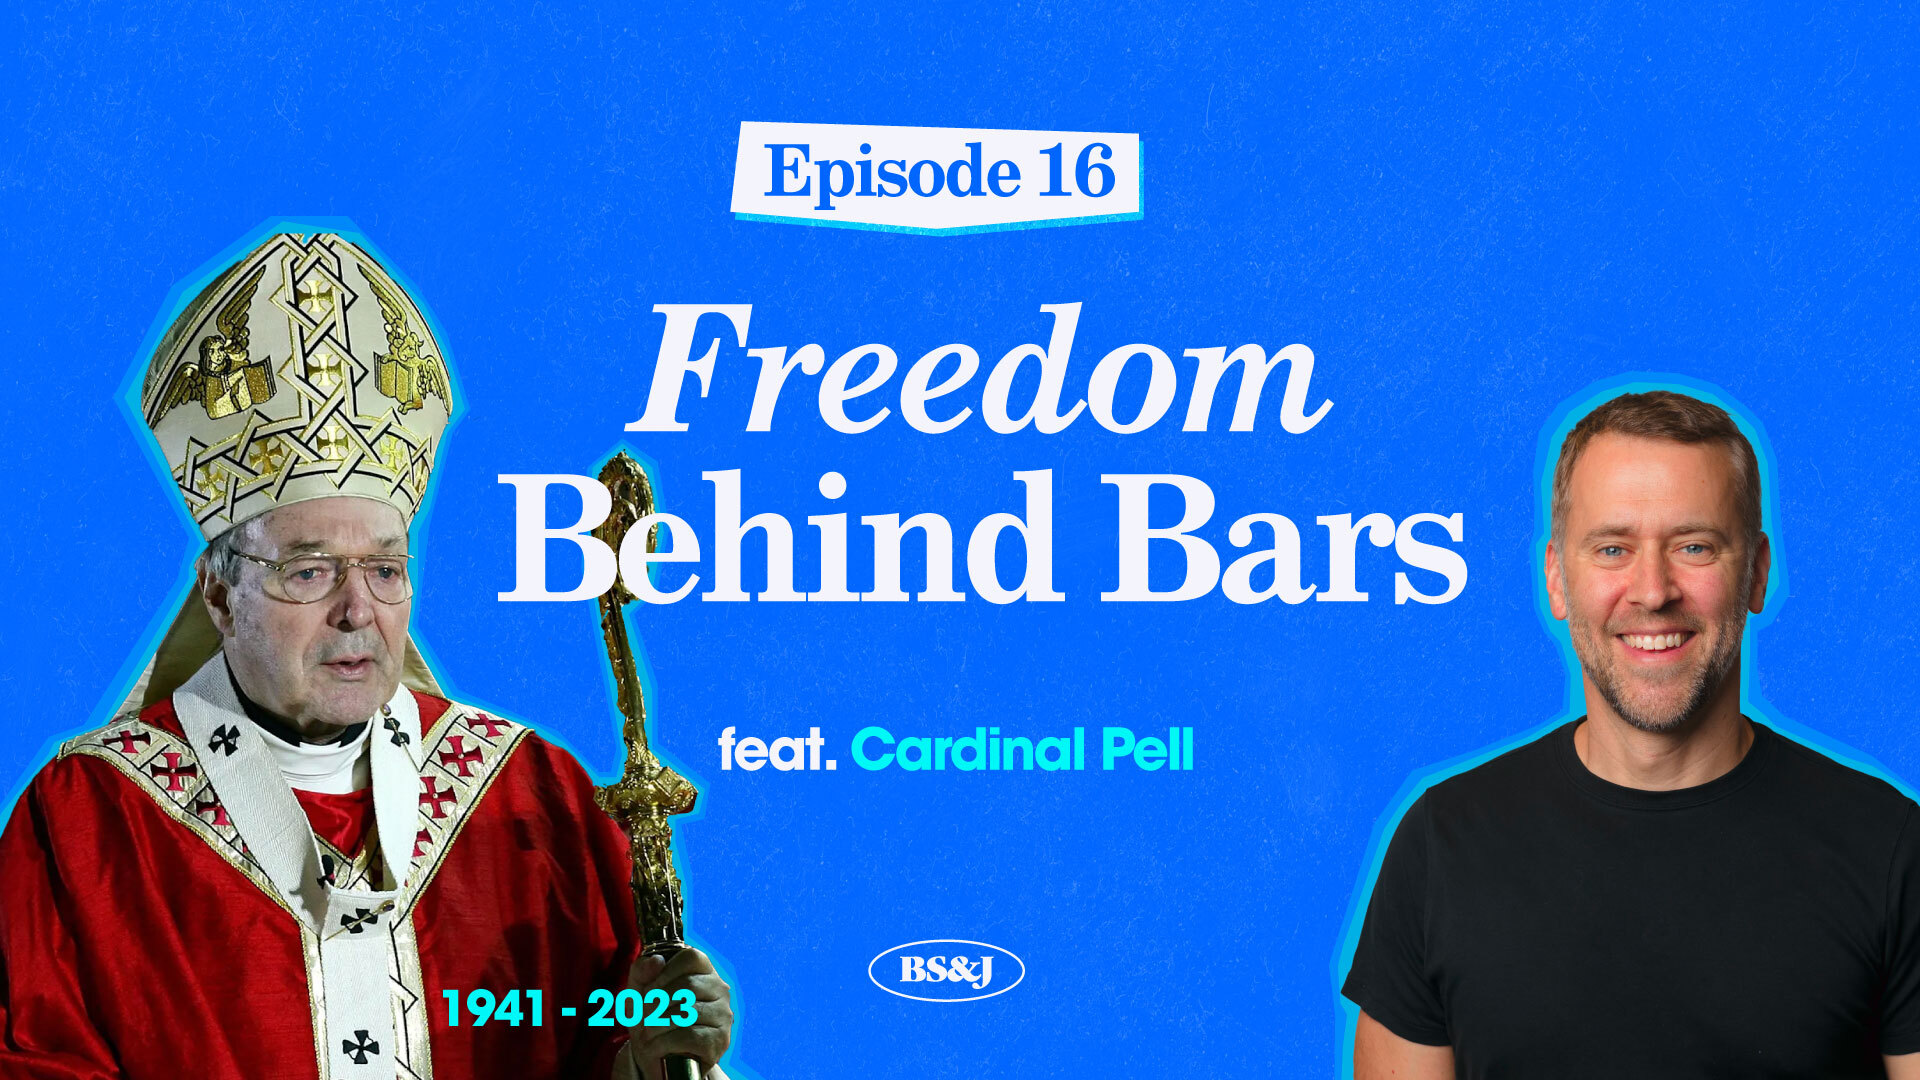 Episode 16 – Freedom Behind Bars with Cardinal Pell